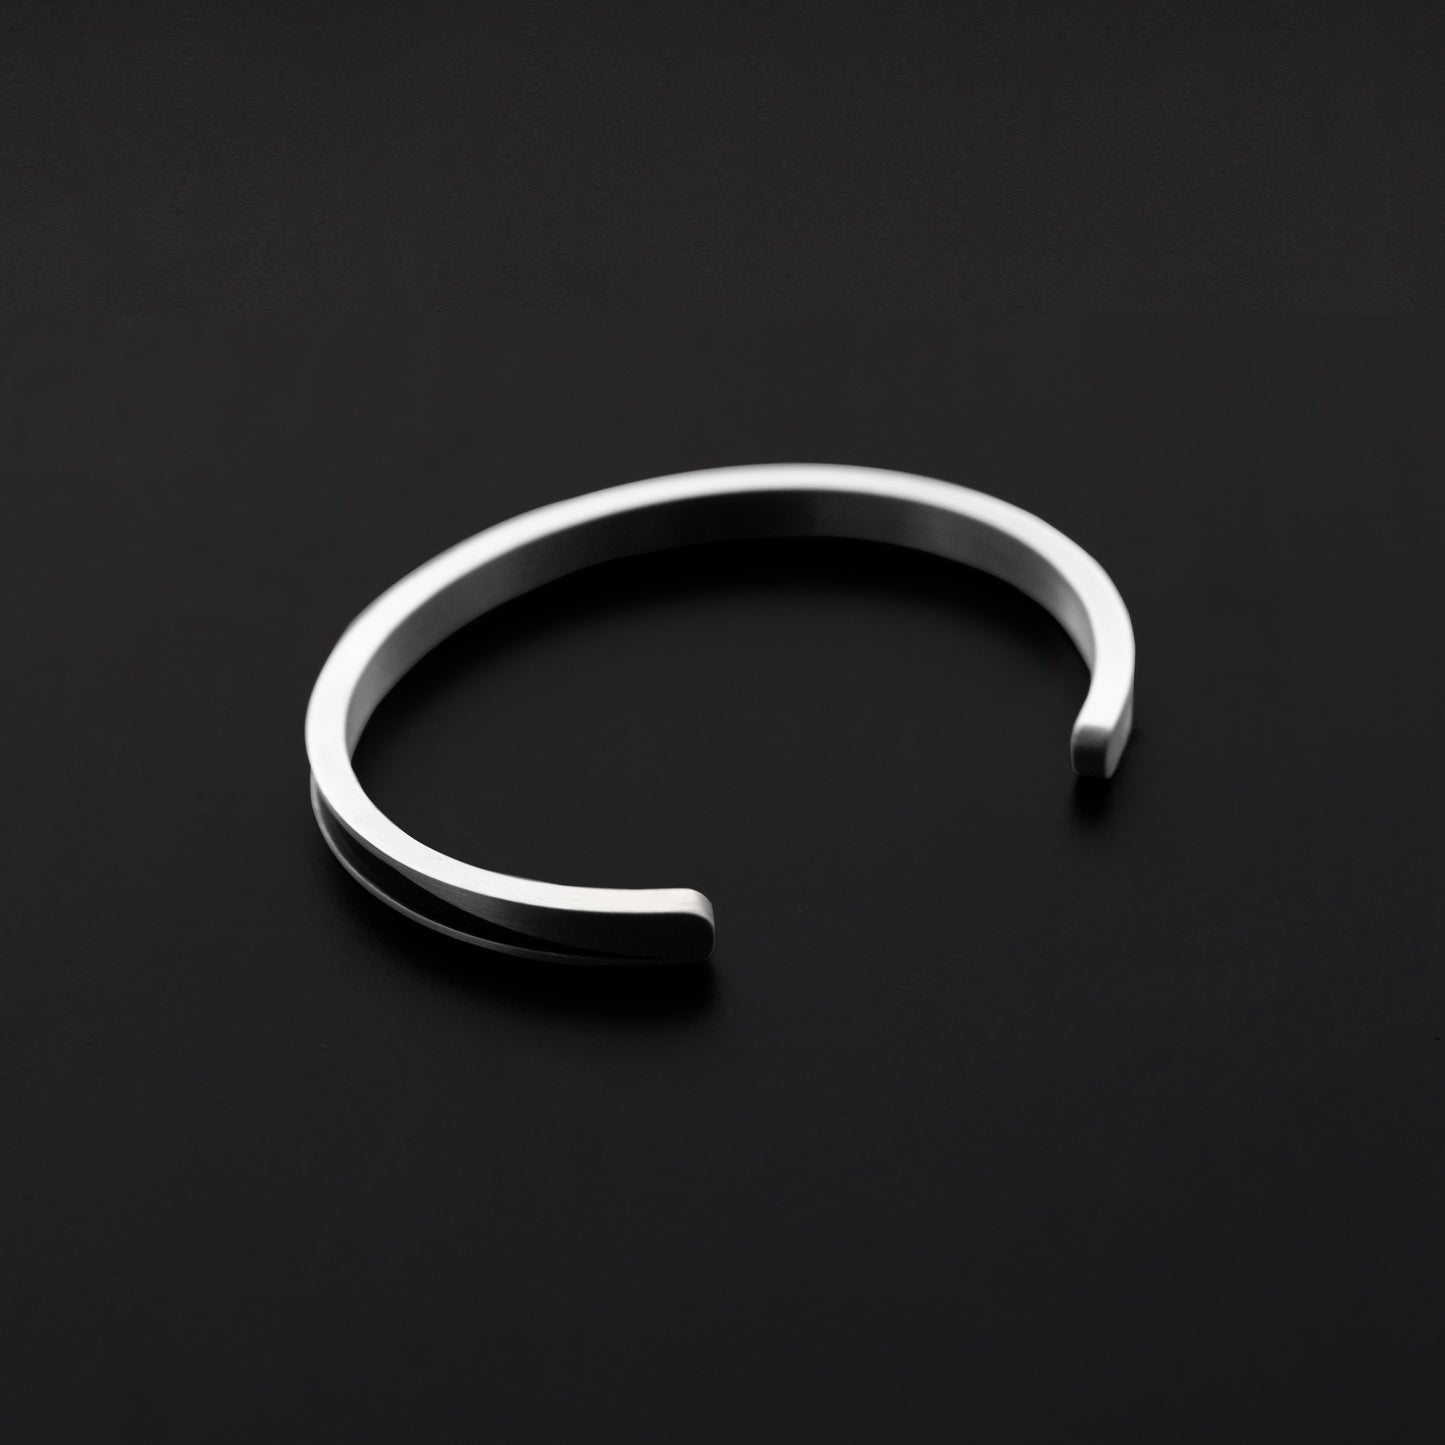 Athens thin cuff bracelet in silver, ATH